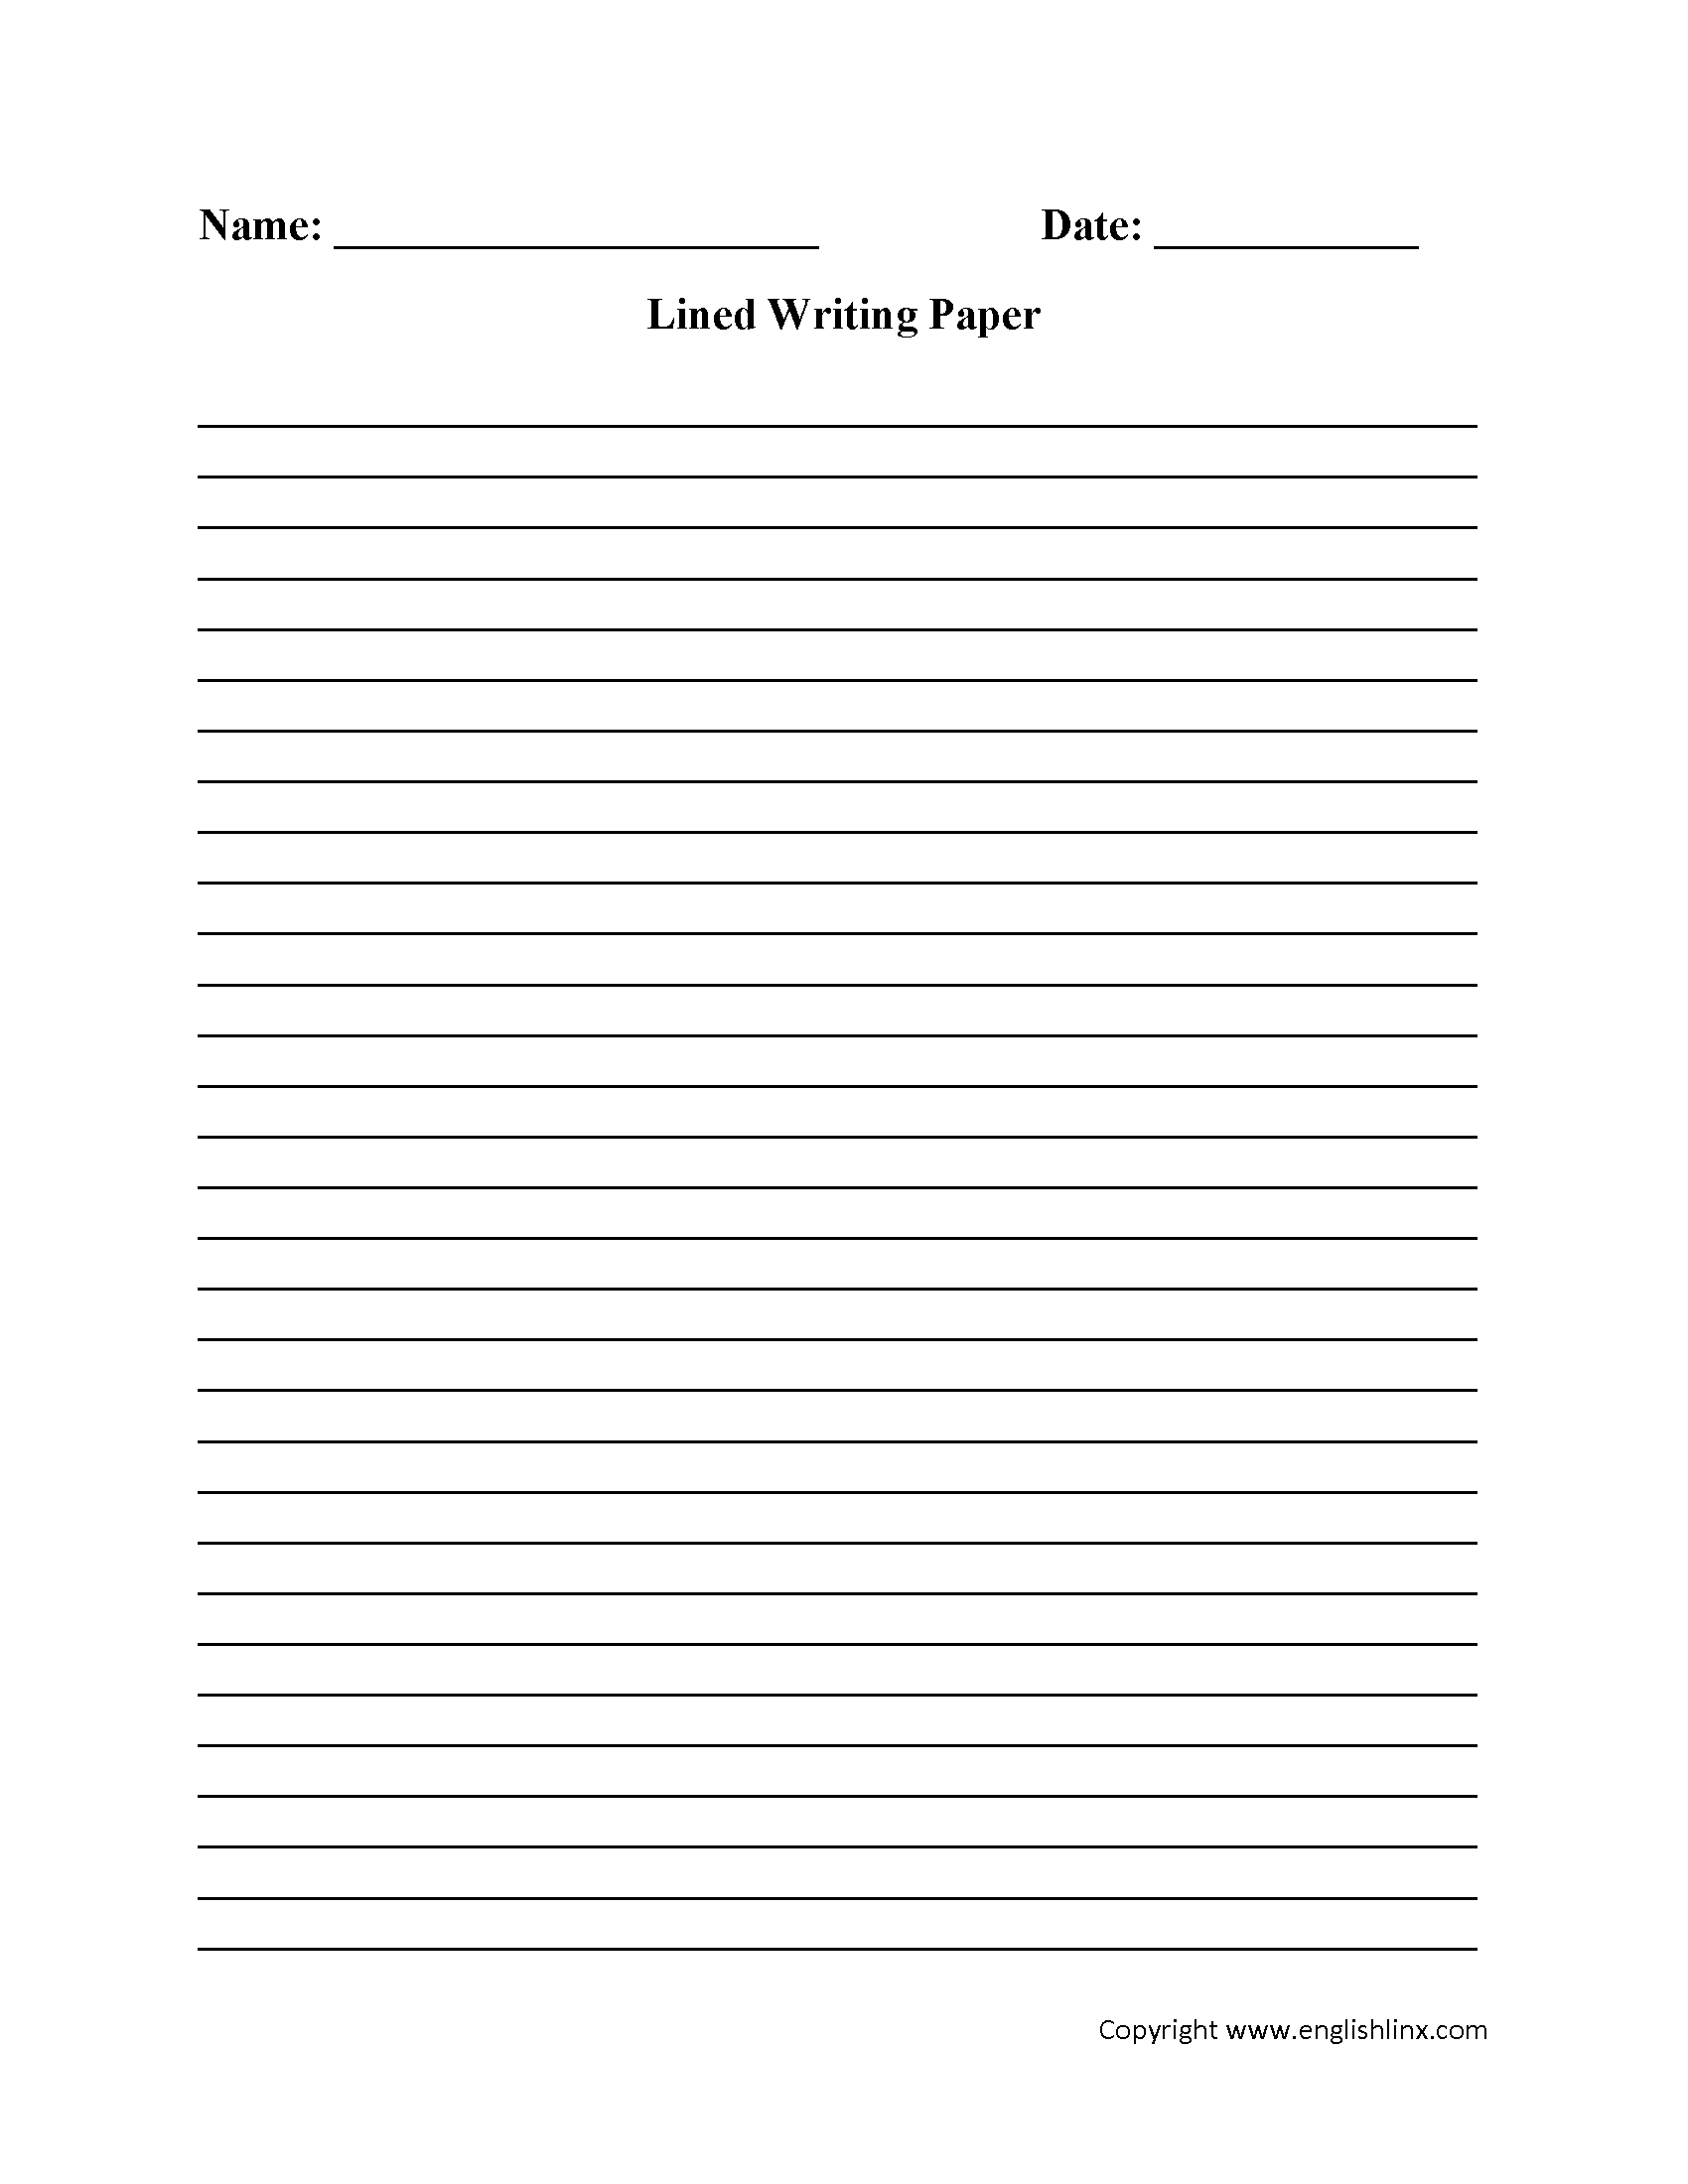 Writing template with lines